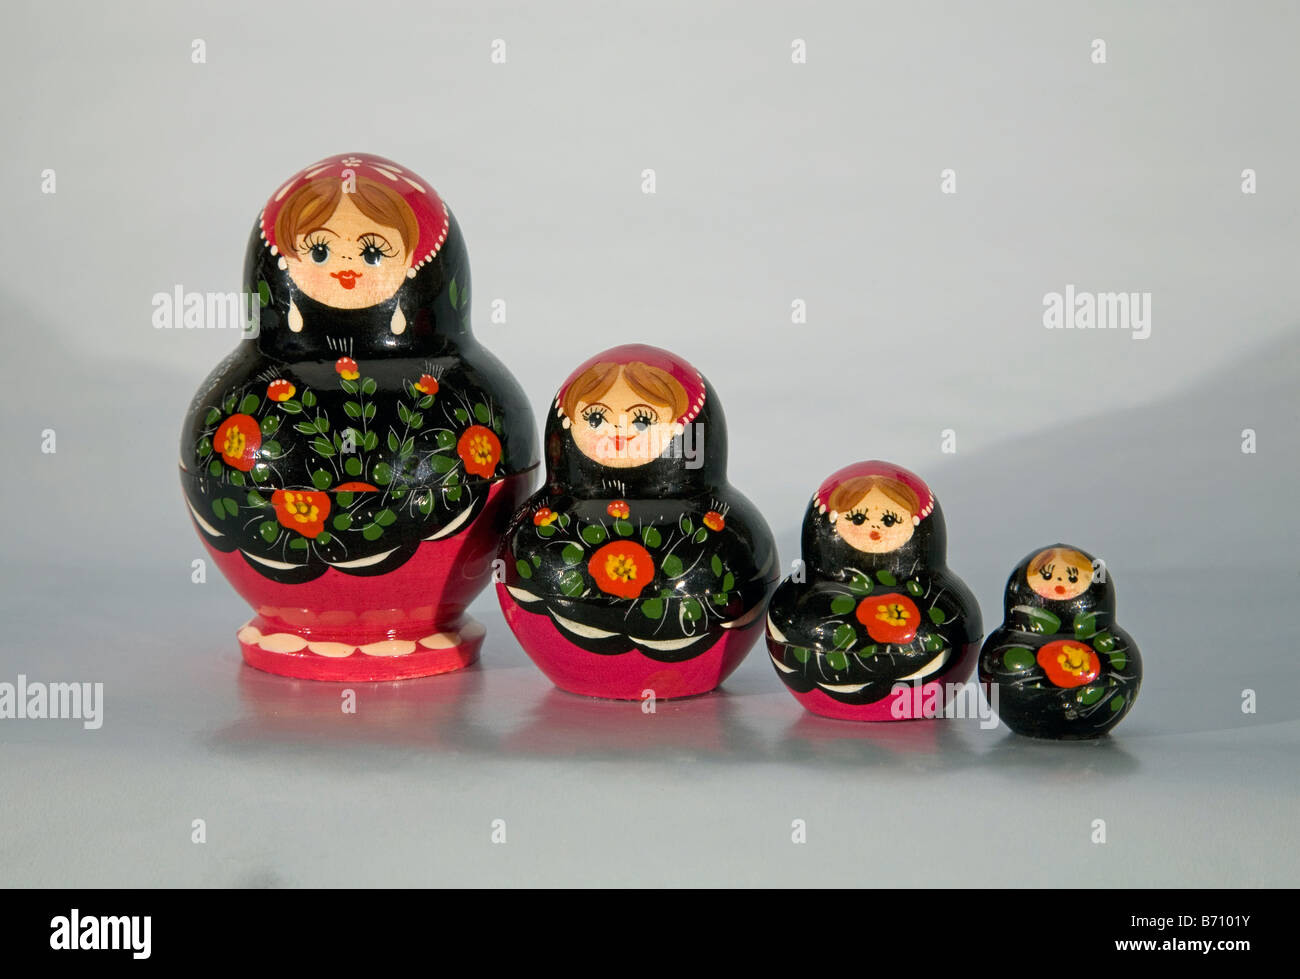 Detail of Russian nesting dolls also known as matryoshka dolls Babushka dolls or Russian nested dolls also called a stacking dol Stock Photo